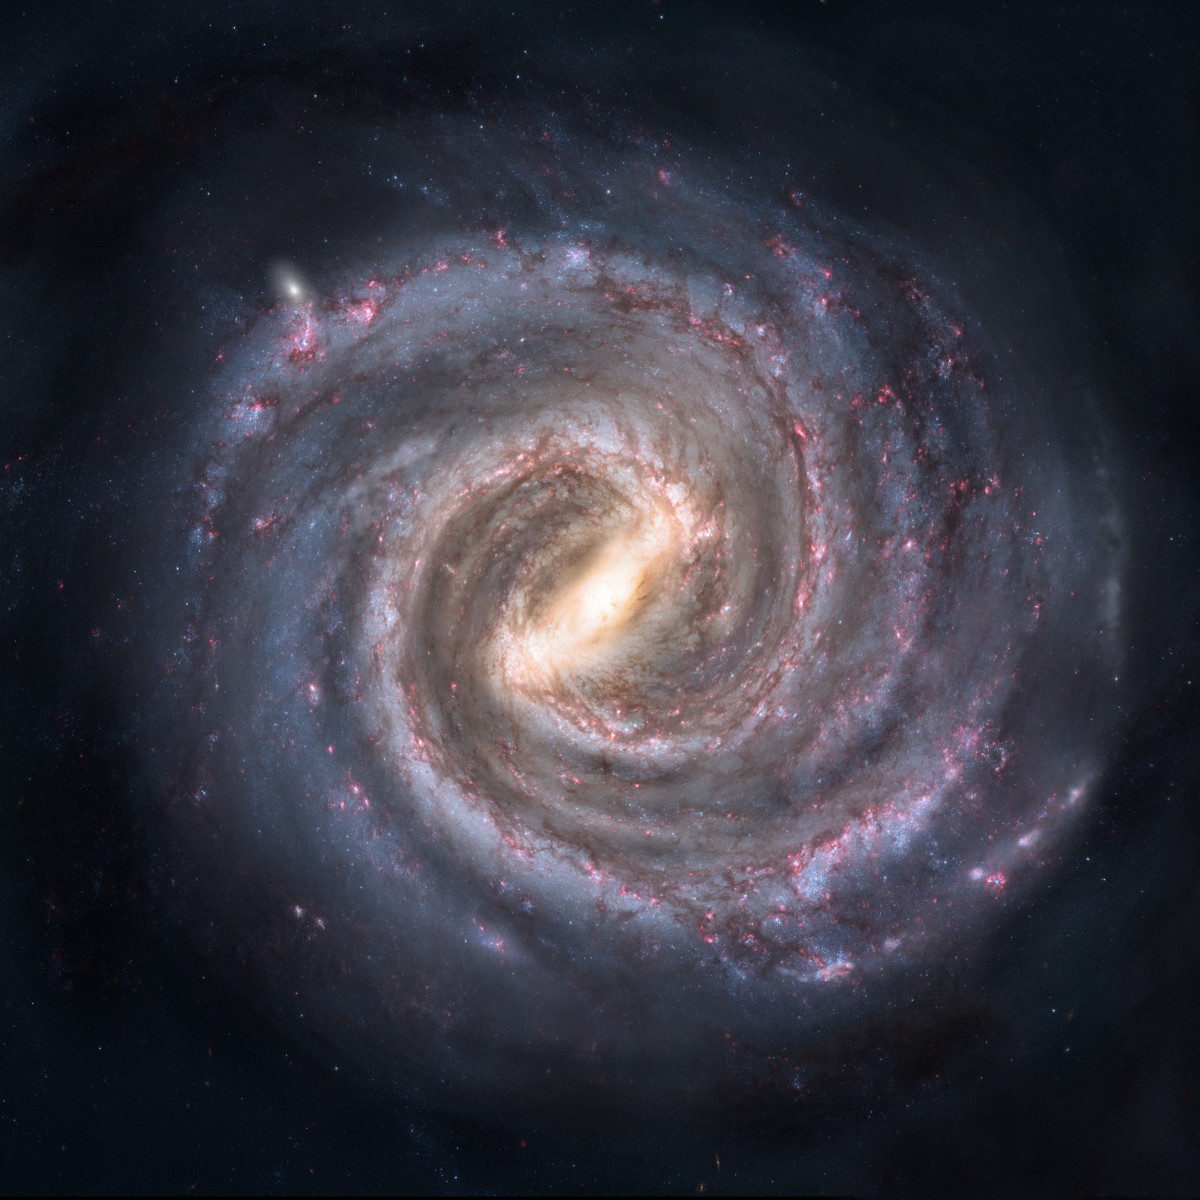 Our galaxy is vast. How far do aliens travel to get to Earth?